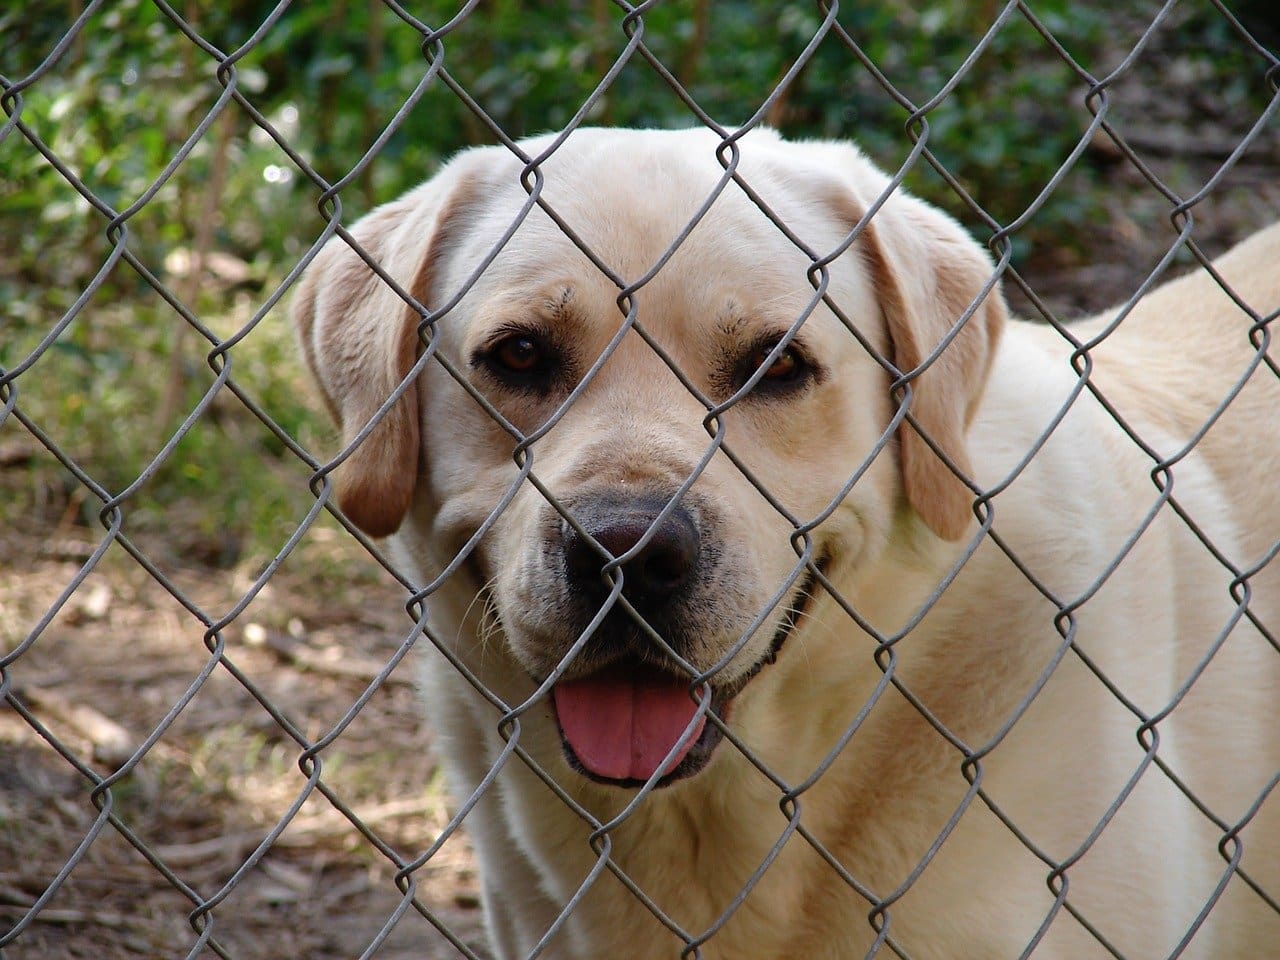 How To Keep Dog From Digging Under Chain Link Fence